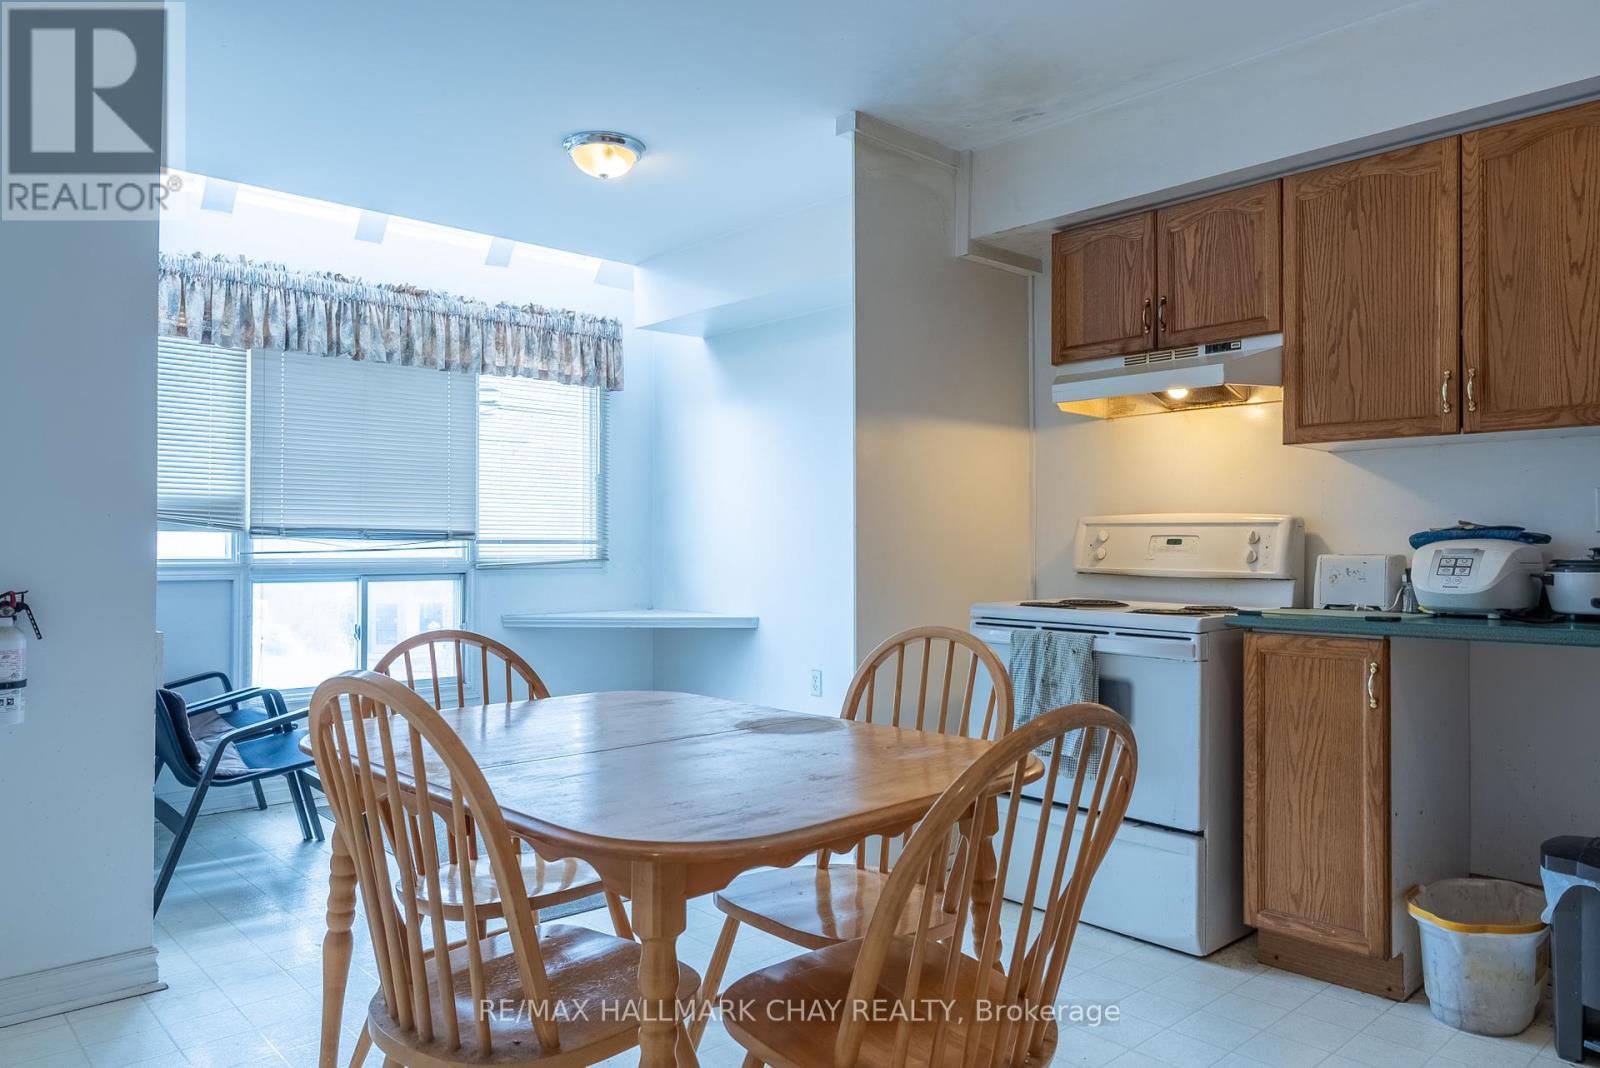 Home Shots Real Estate Photography - 331 Duckworth Street in #Barrie is For  Sale! #RealEstate this 4 Bedroom Back Split is located close to Georgian  College and RVH. Contact Ross & Mandy